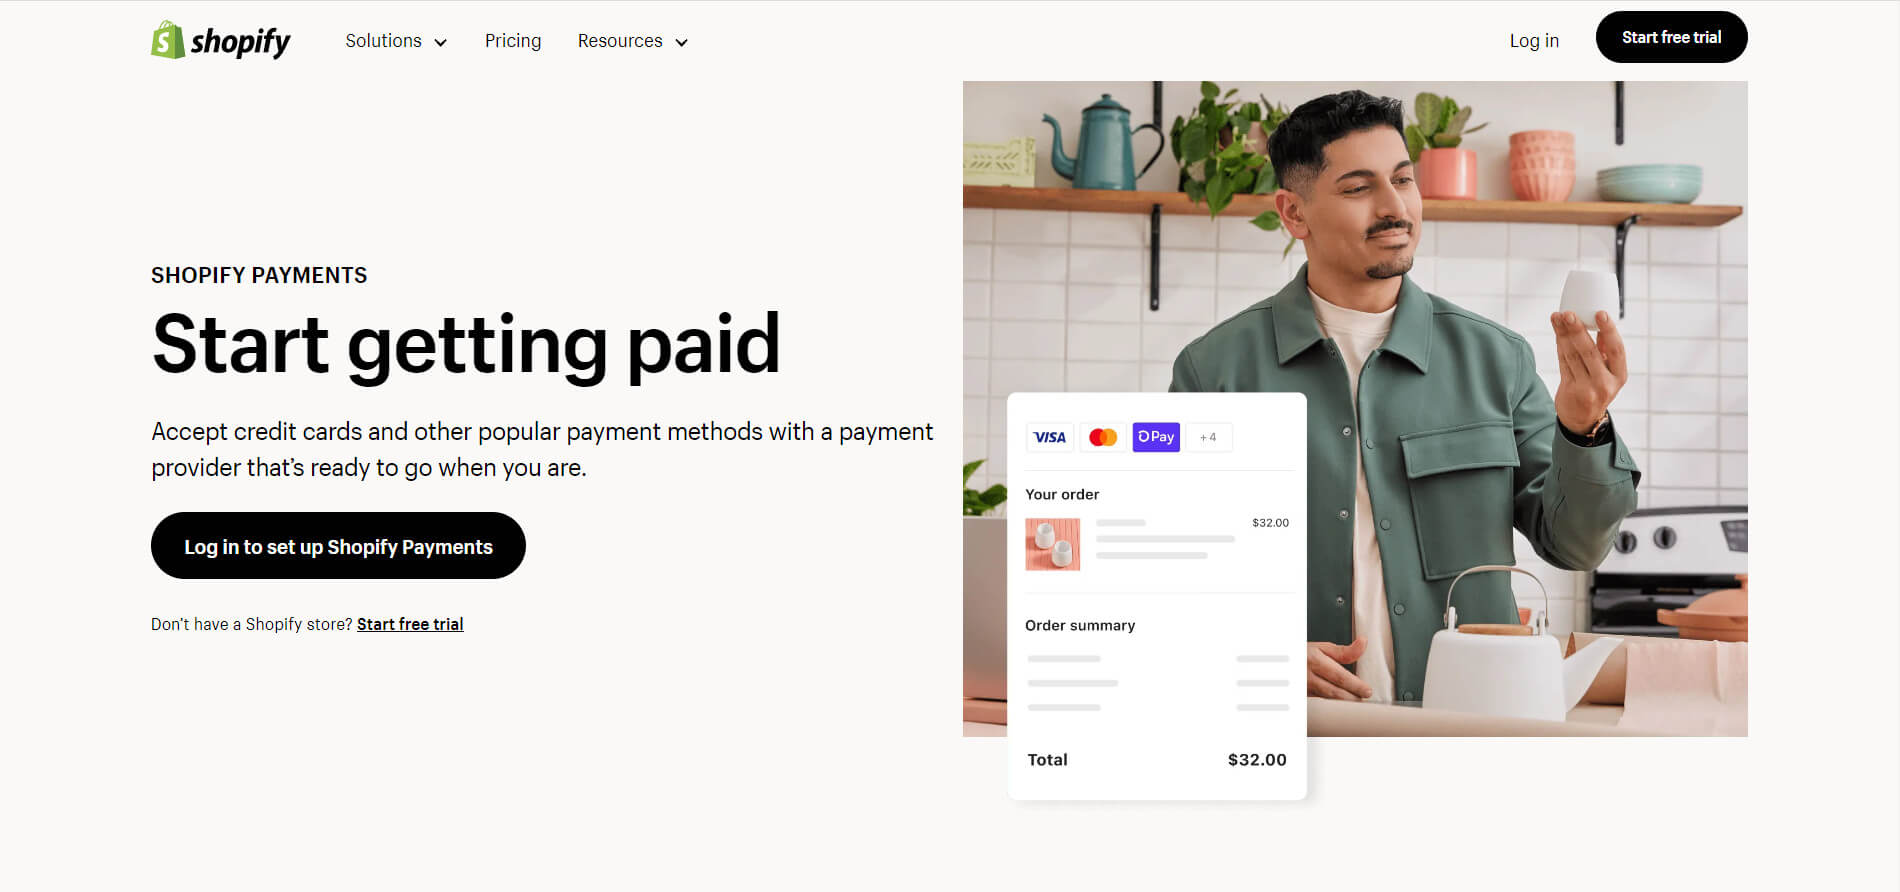 Shopify Payments sign-up page